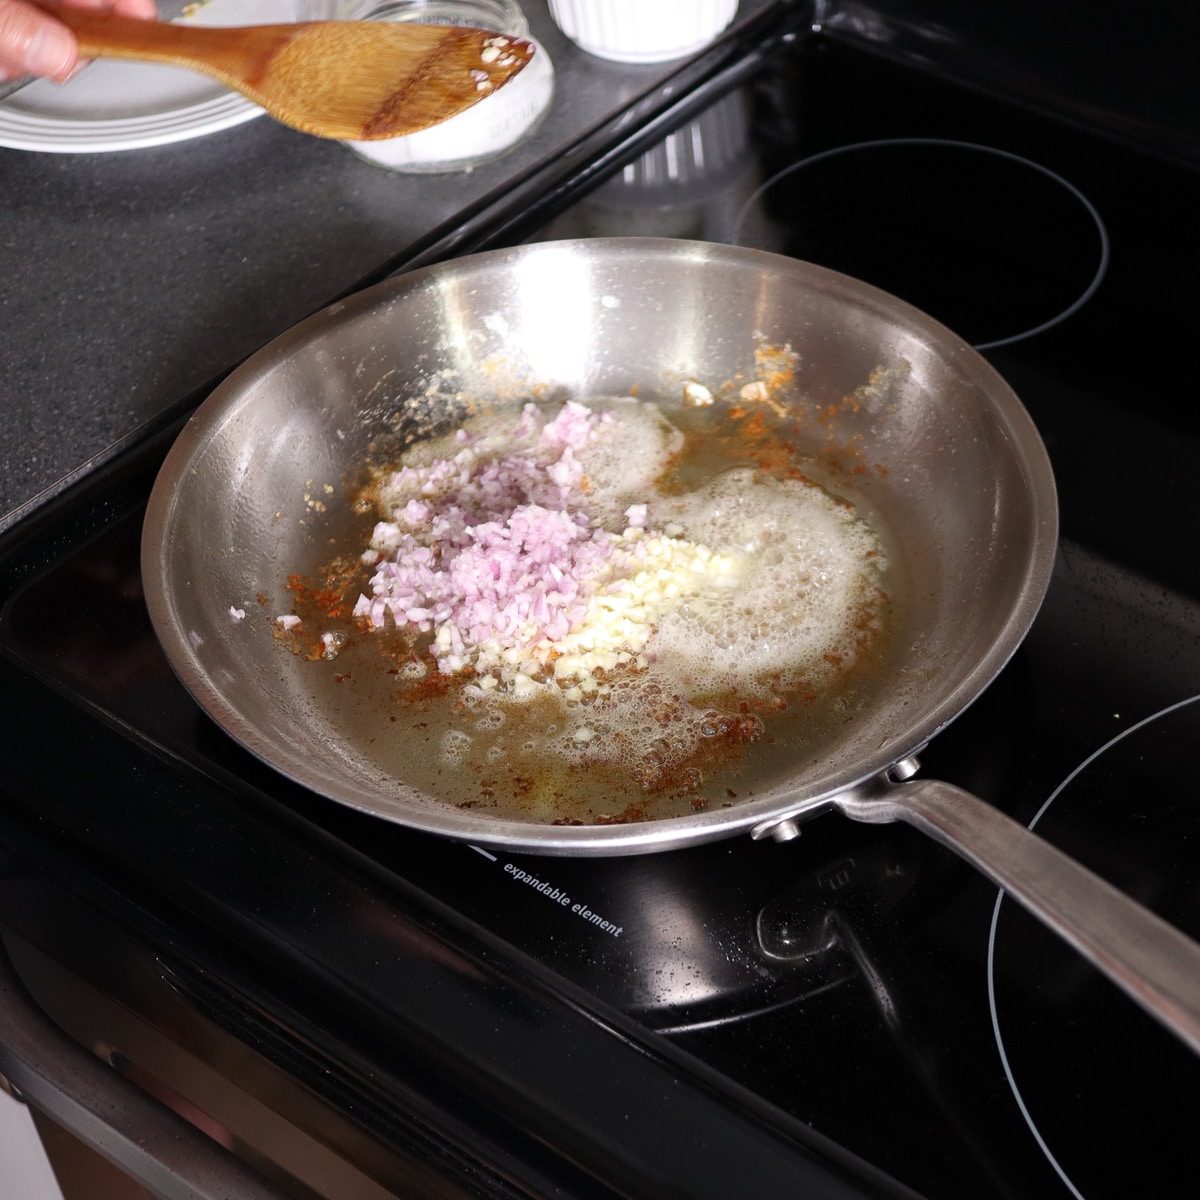 mixing the shallots and garlic in the pan